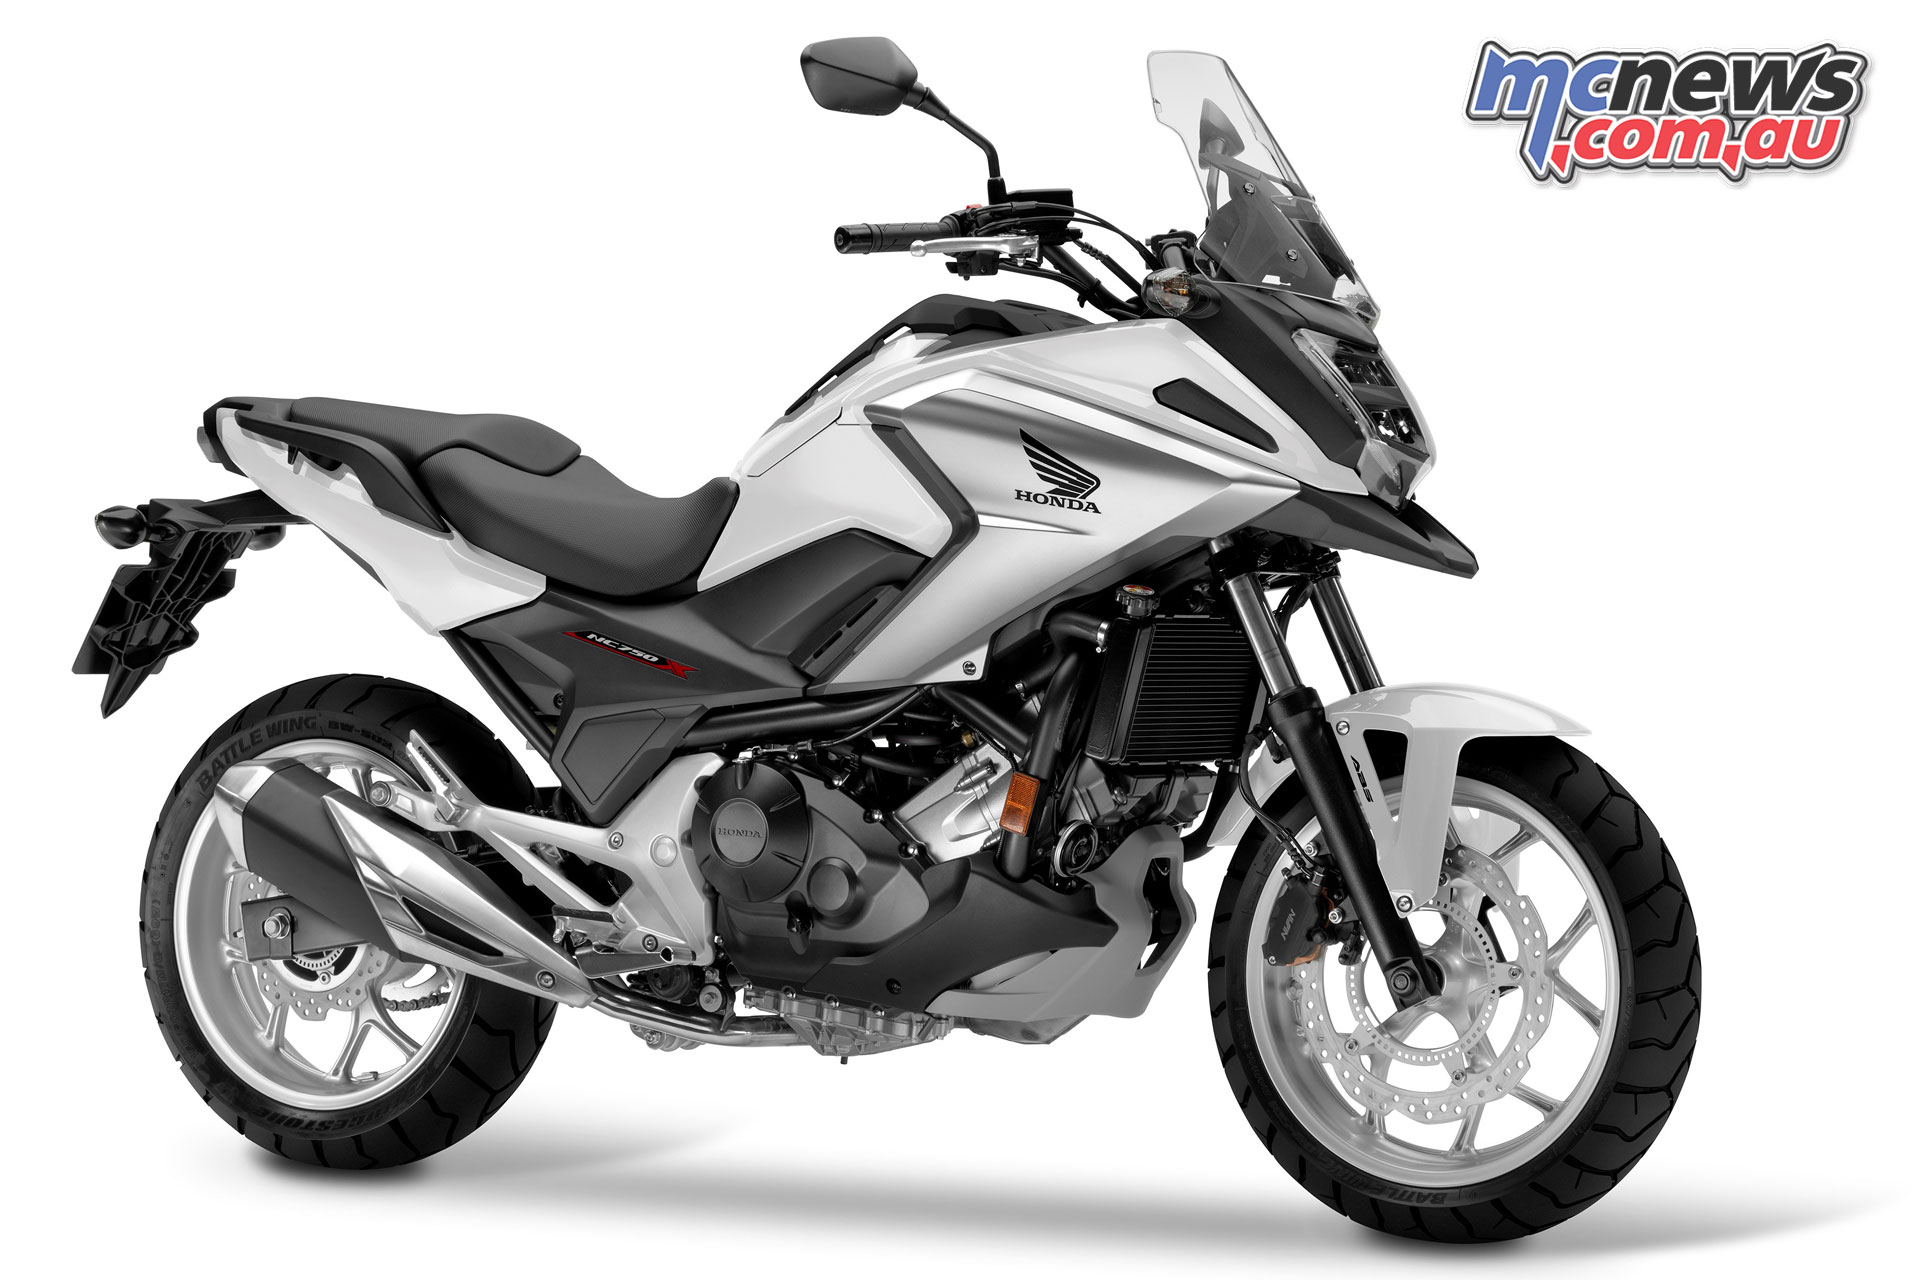 Honda Nc750x Gains Traction Control Motorcycle News Sport And Reviews